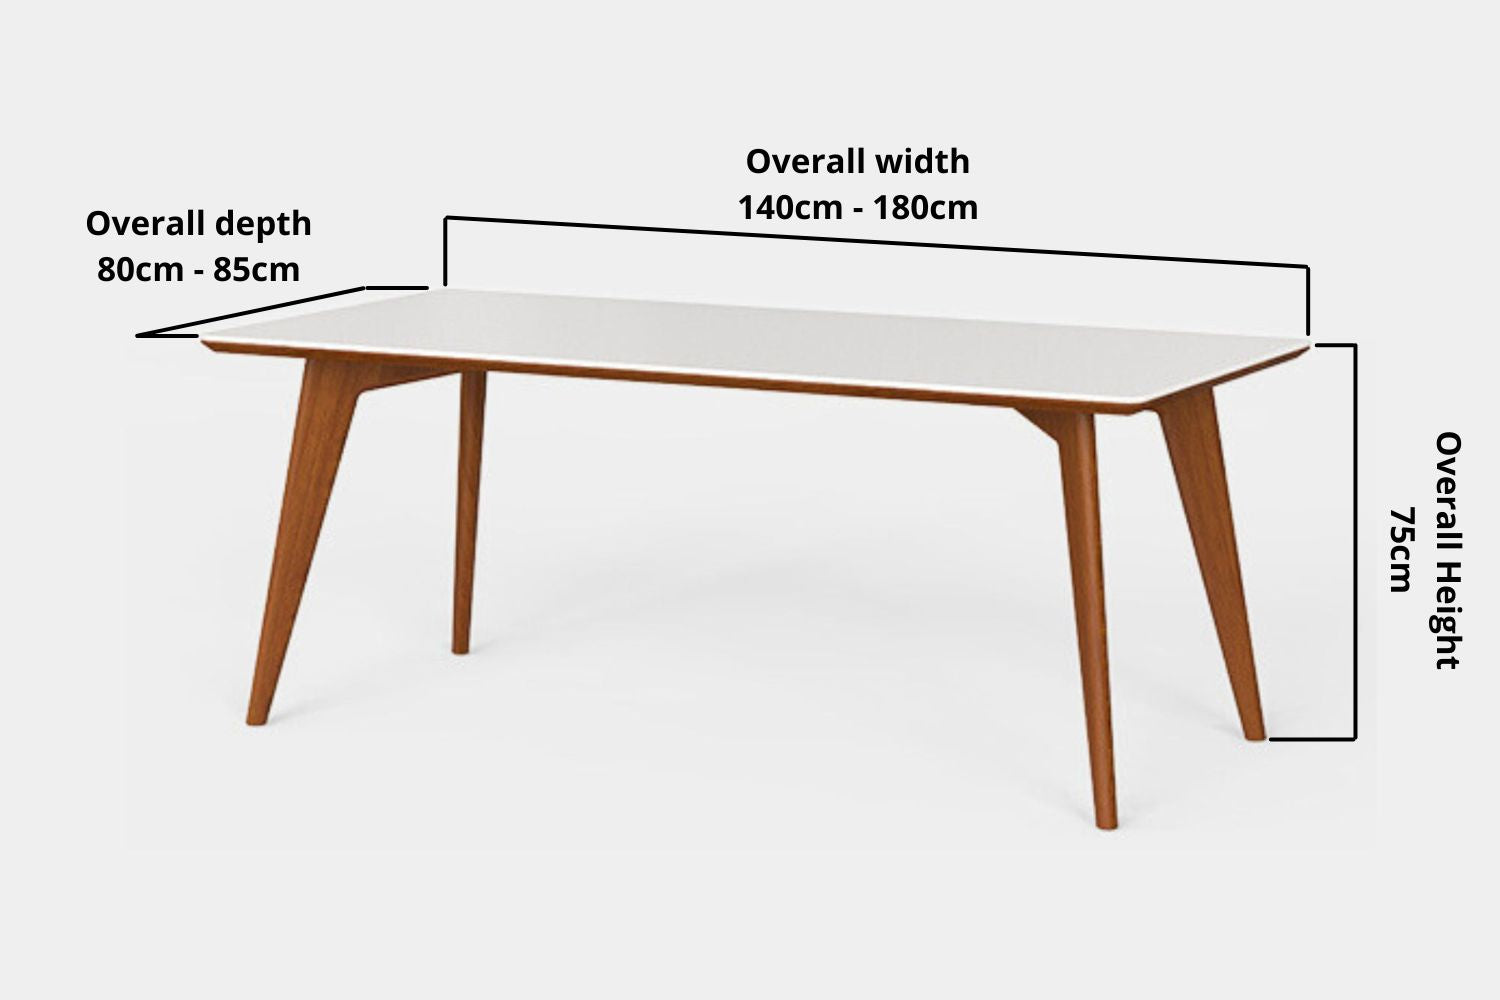 Key product dimensions such as depth, width and height for Trevor Sintered Stone Dining Table